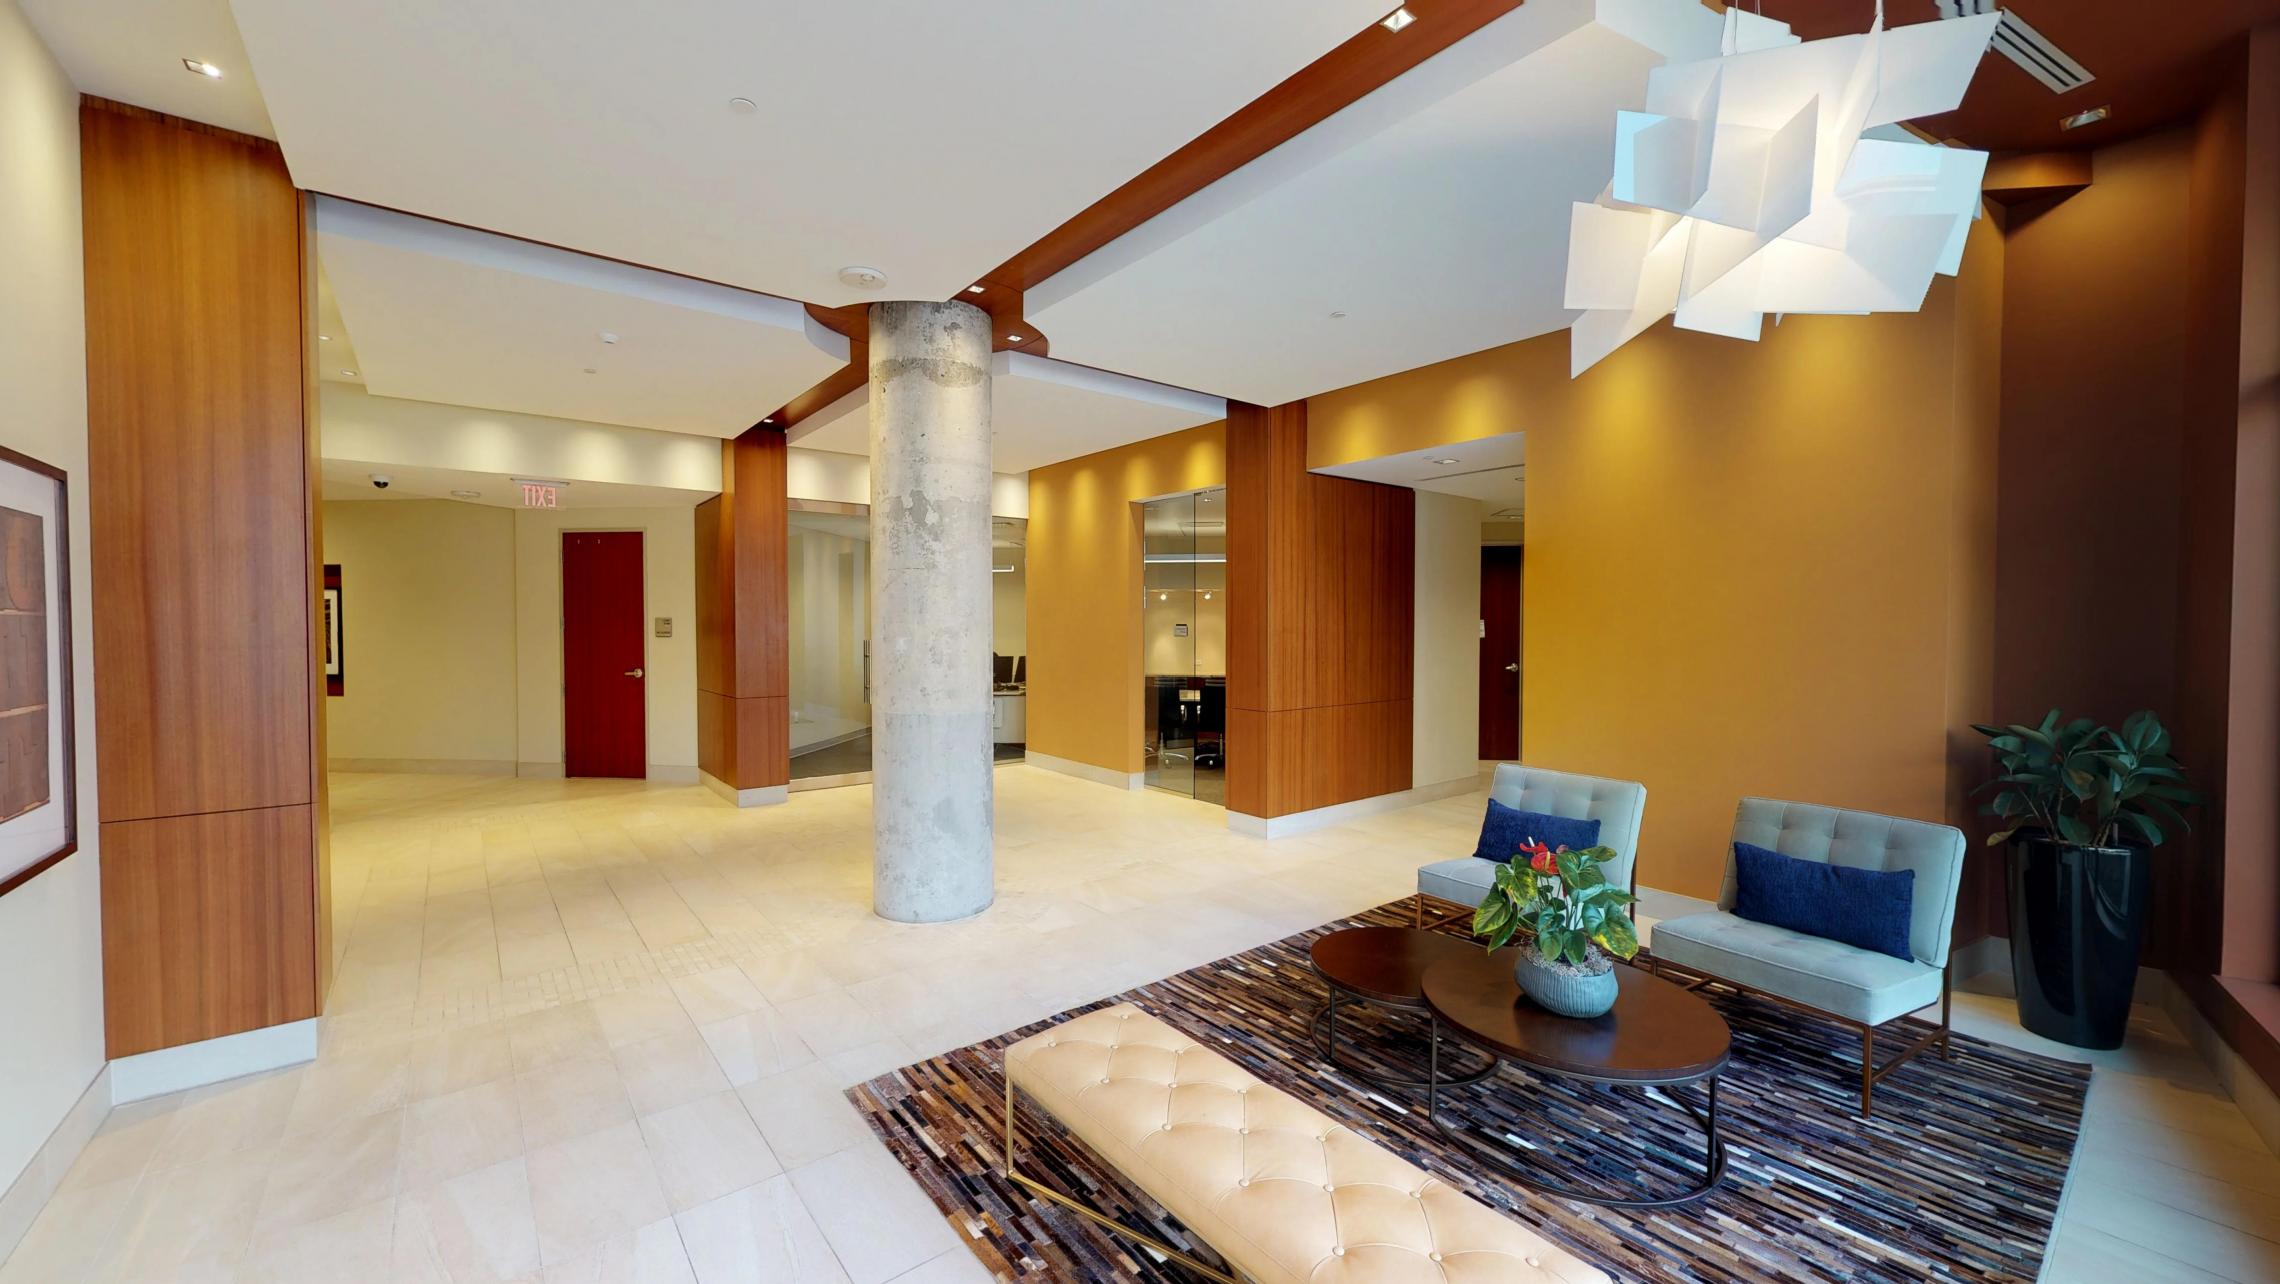 The-Pressman-Apartments-Upscale-Club-room-Modern-Luxury-Downtown-Madison-High-Rise-Lifestyle-Capitol-Square-lobby